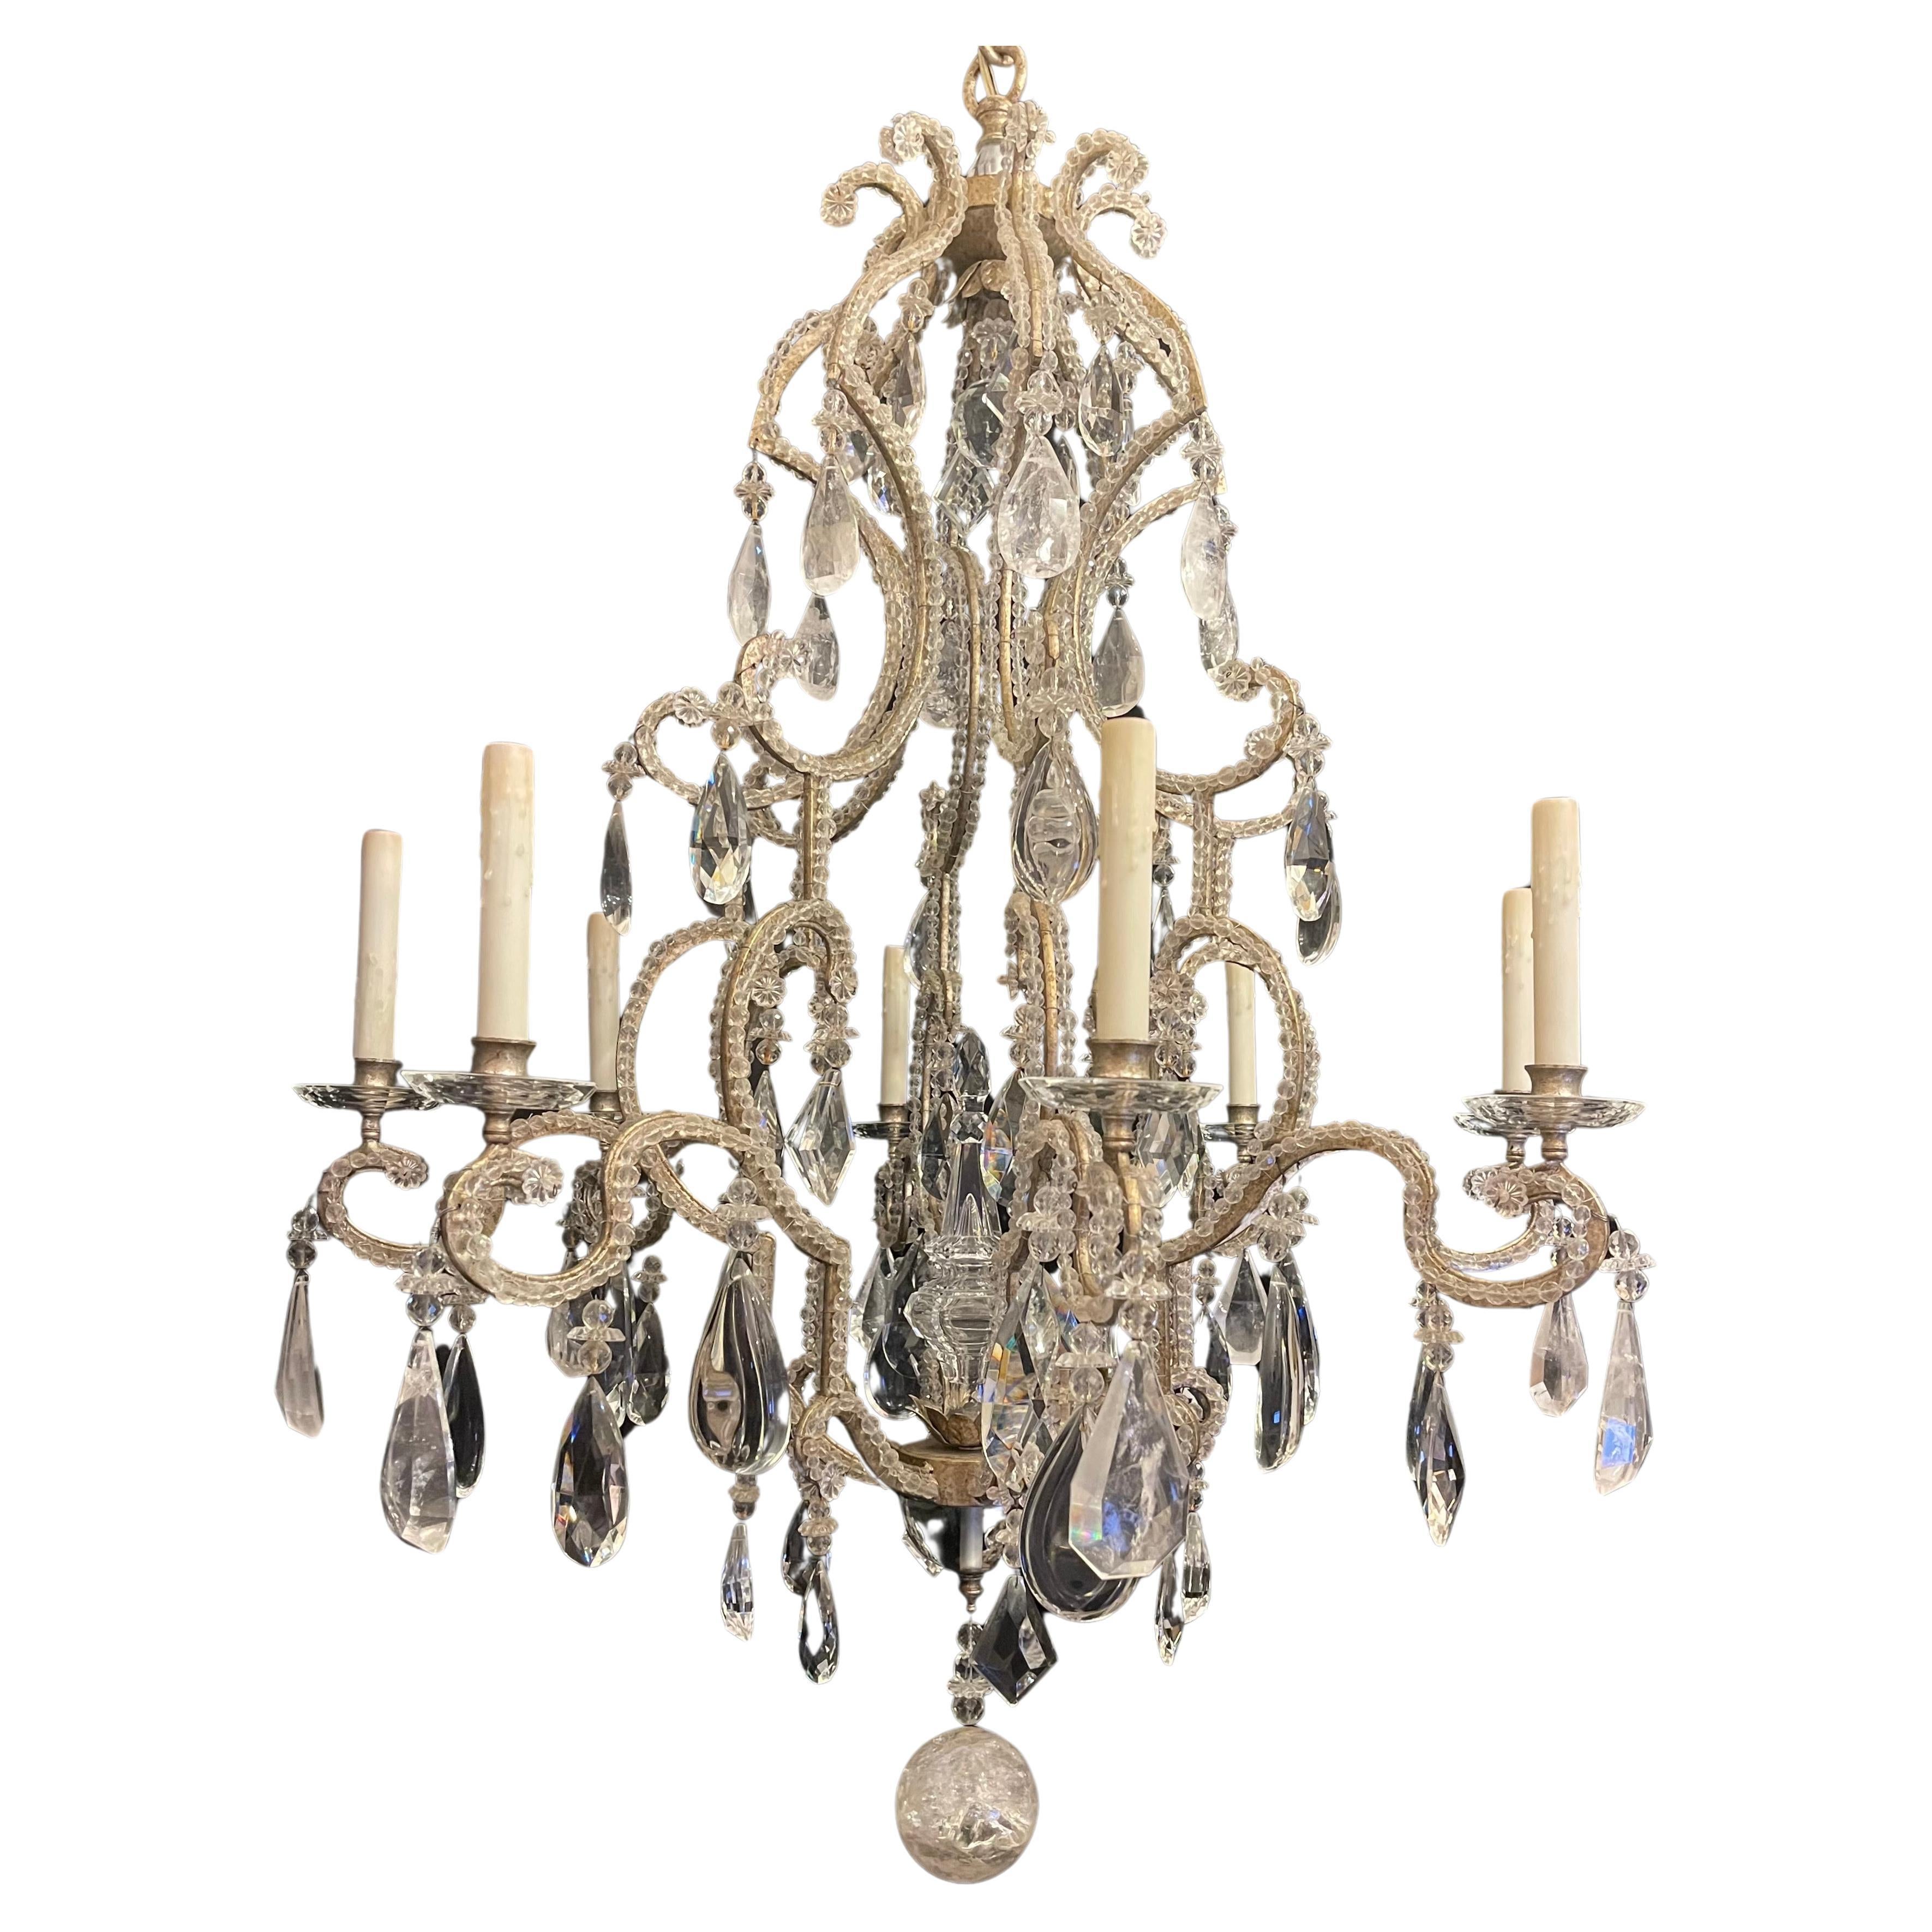 A Wonderful Mid-Century Modern Chandelier In The Manner Of Maison Baguès, Style with silver gilt and beaded french bird cage form body having alternating rock crystal and multi dimensional crystals through out, this large chandelier has 8 candelabra